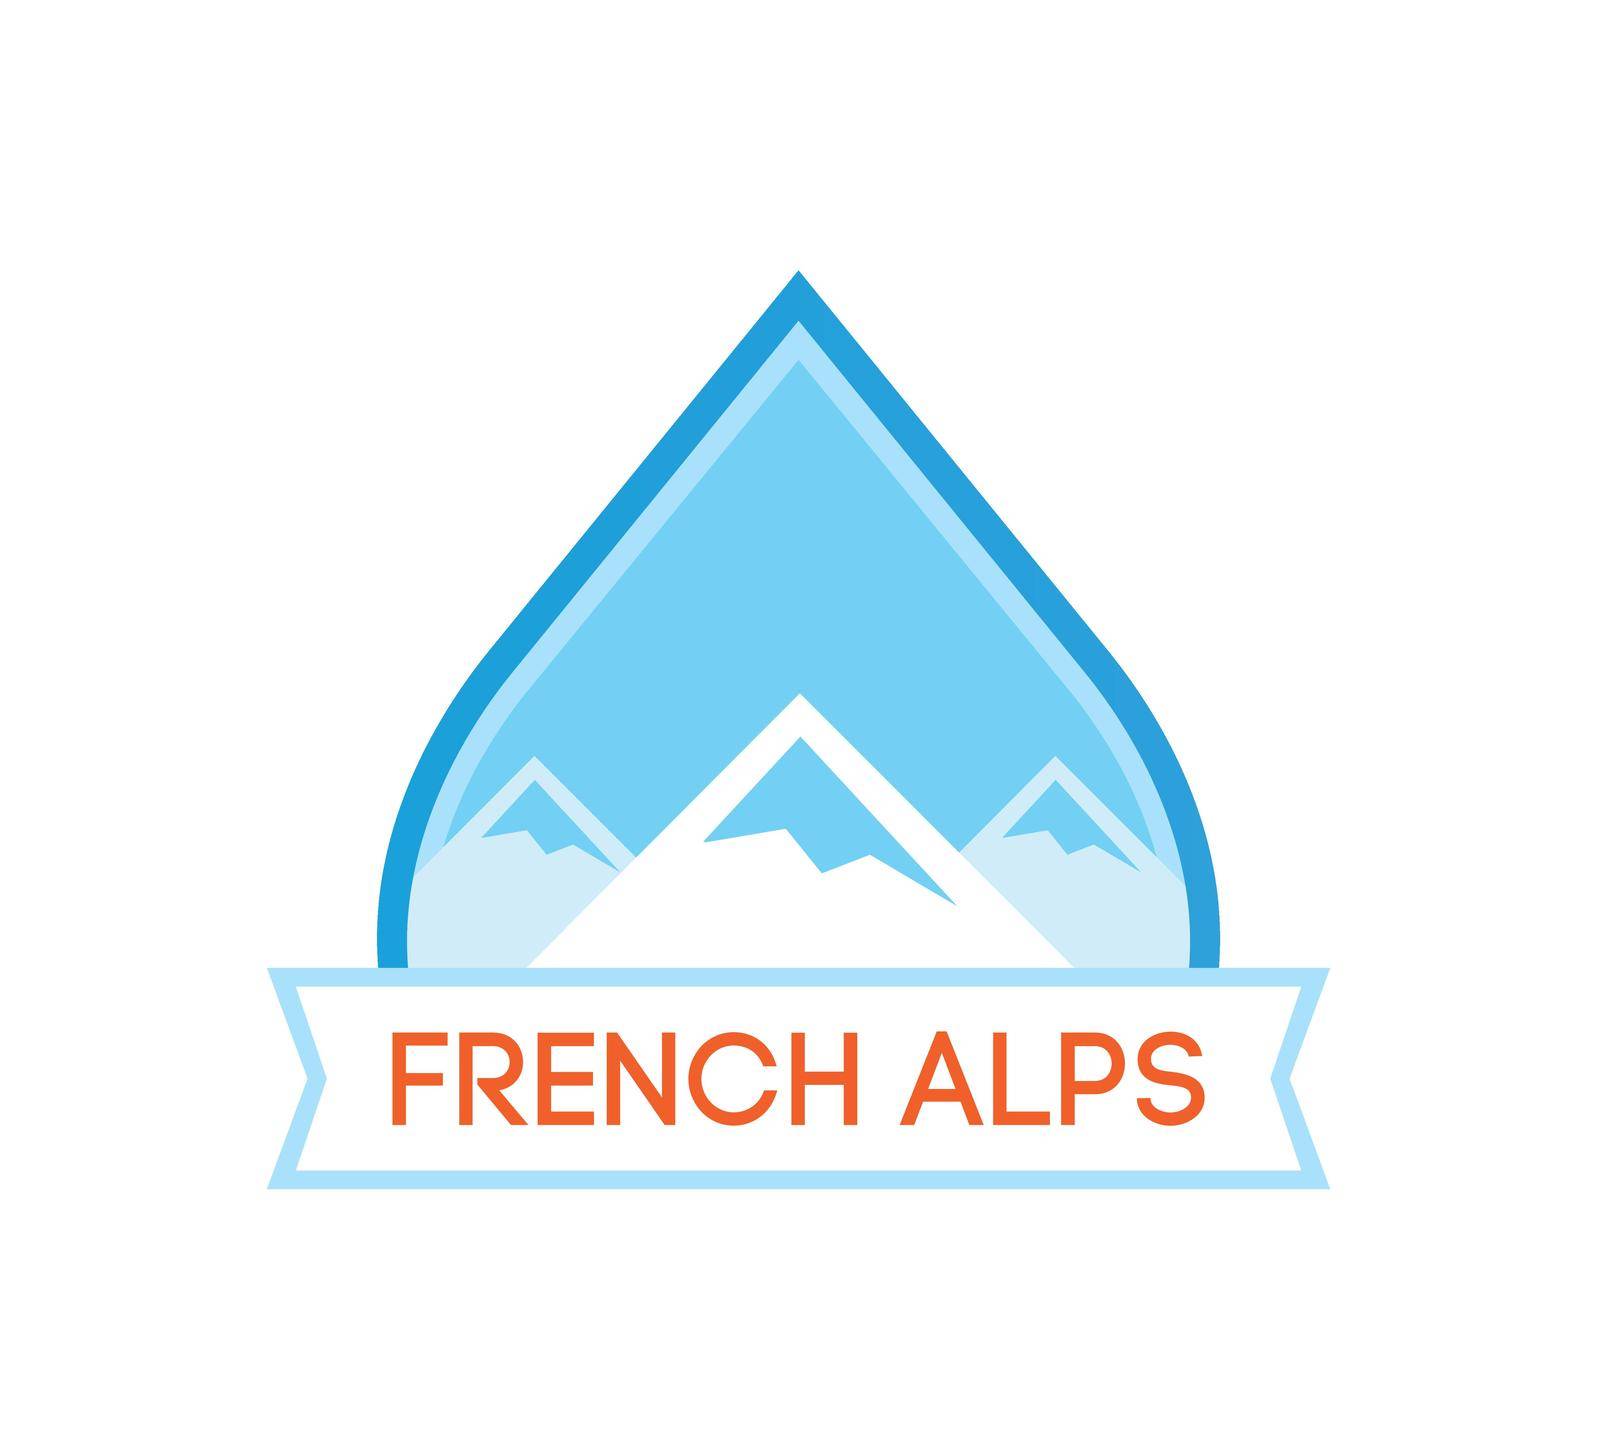 Logotype with French Alps by macroarting